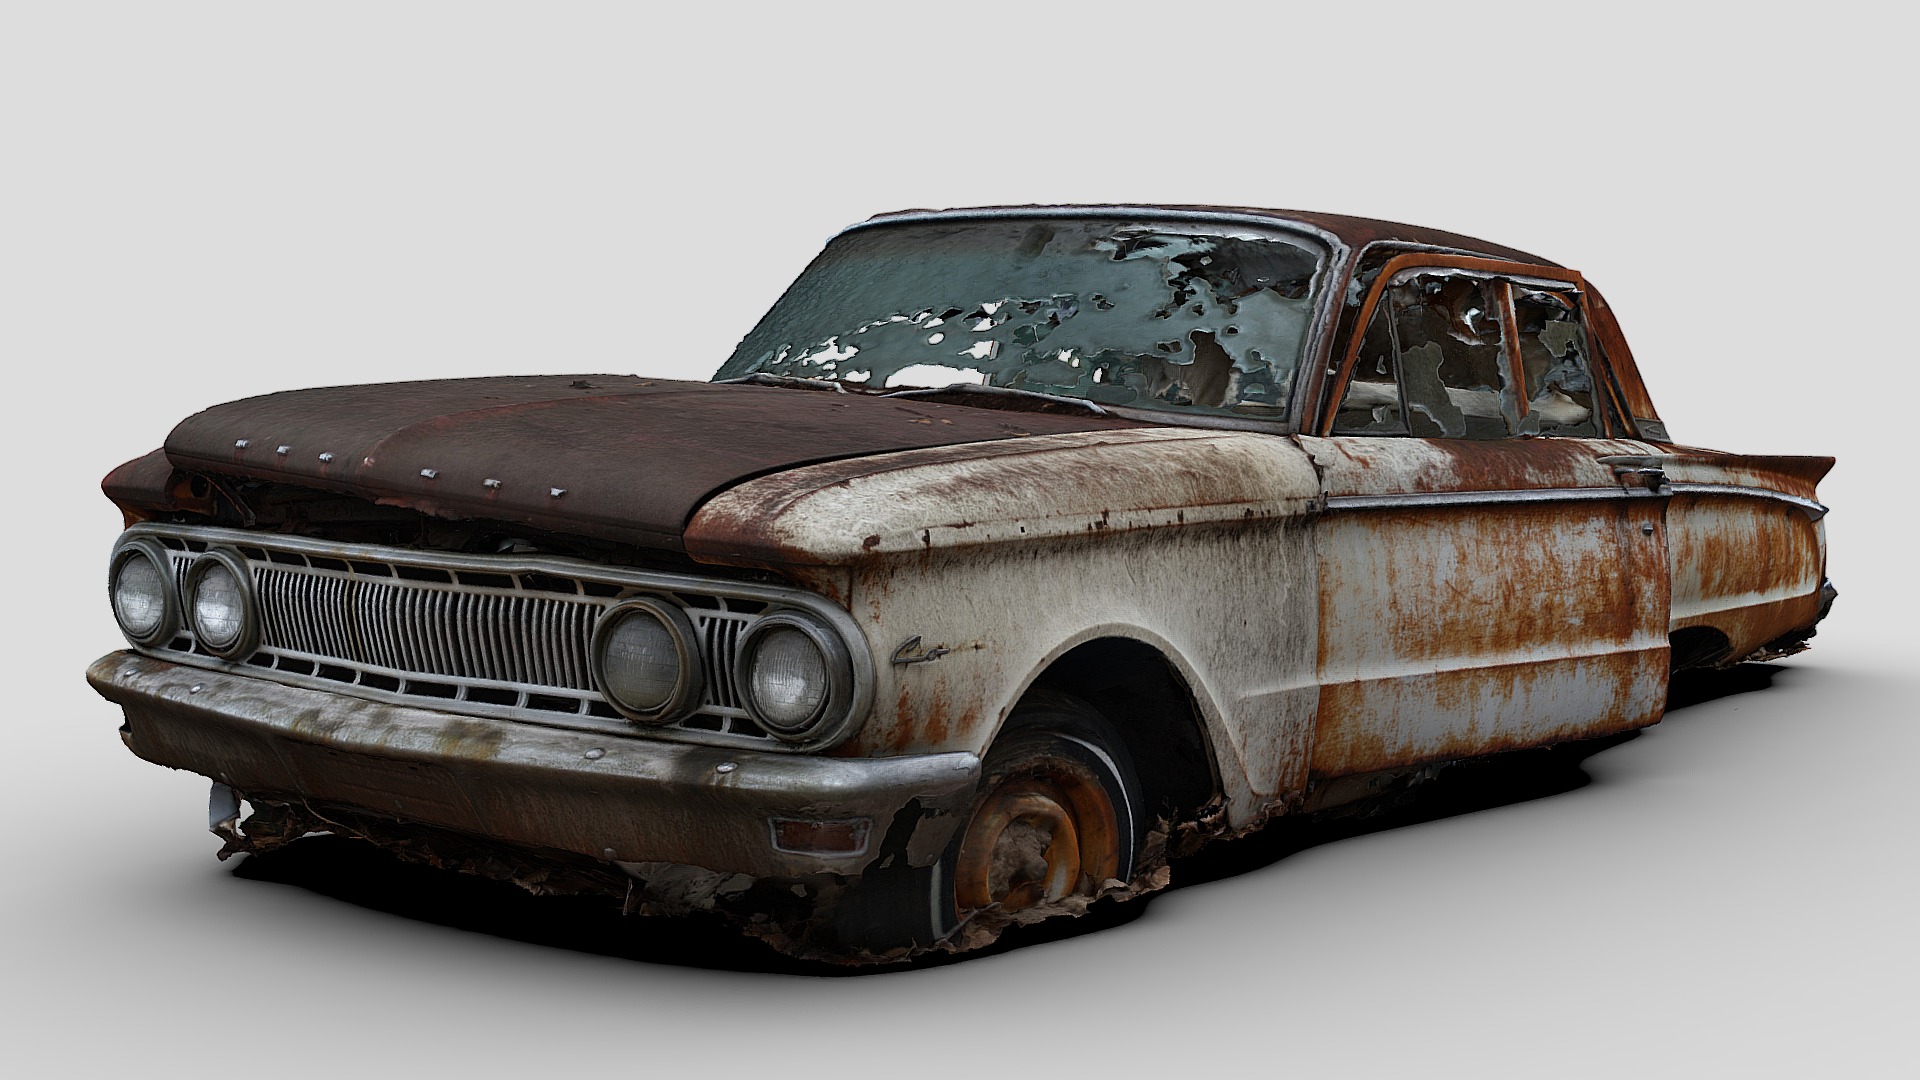 3D model Rusty Mercury Comet - This is a 3D model of the Rusty Mercury Comet. The 3D model is about a brown car with a white background.